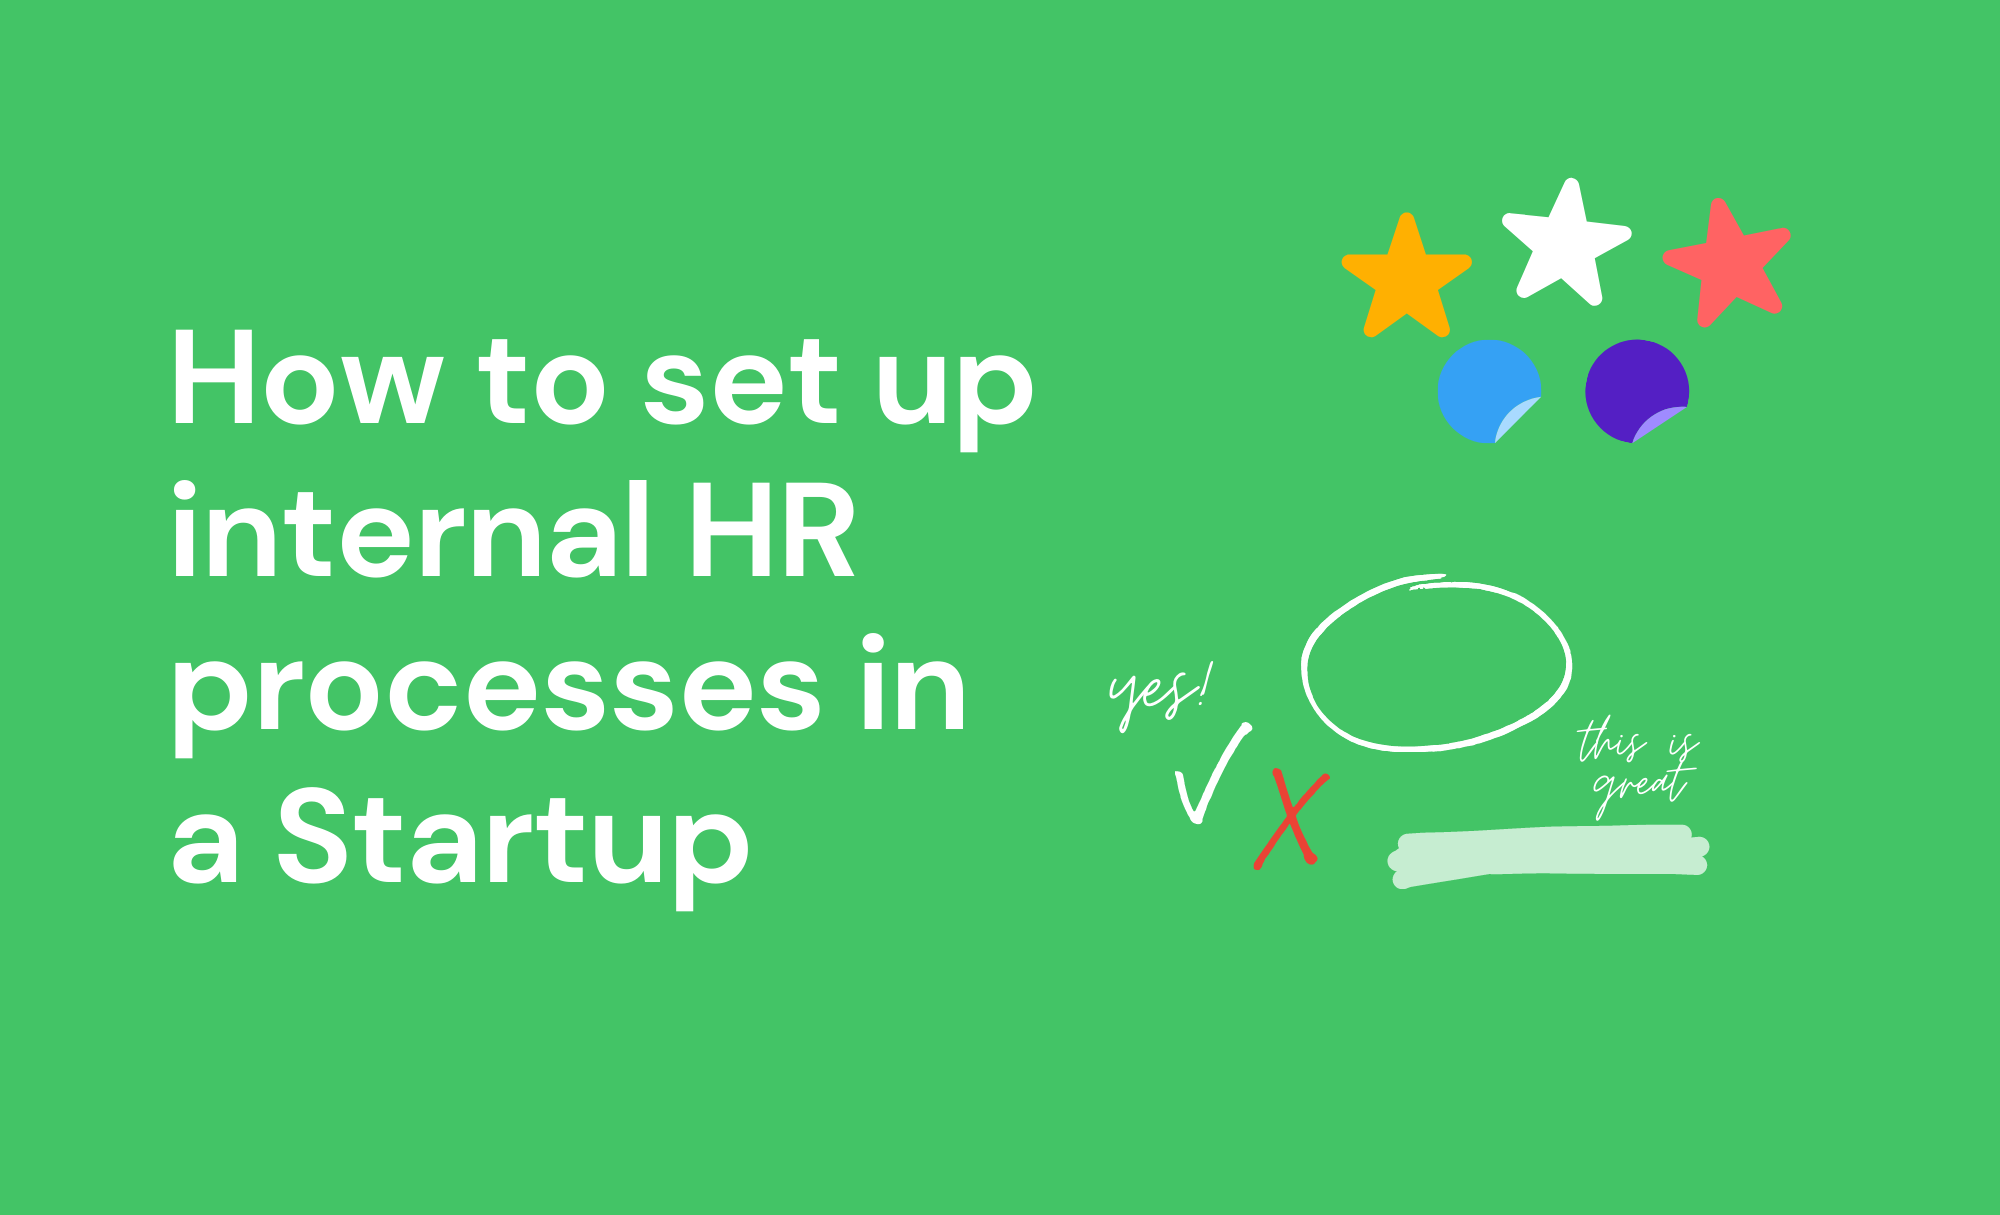 How to set up internal HR processes in a Startup